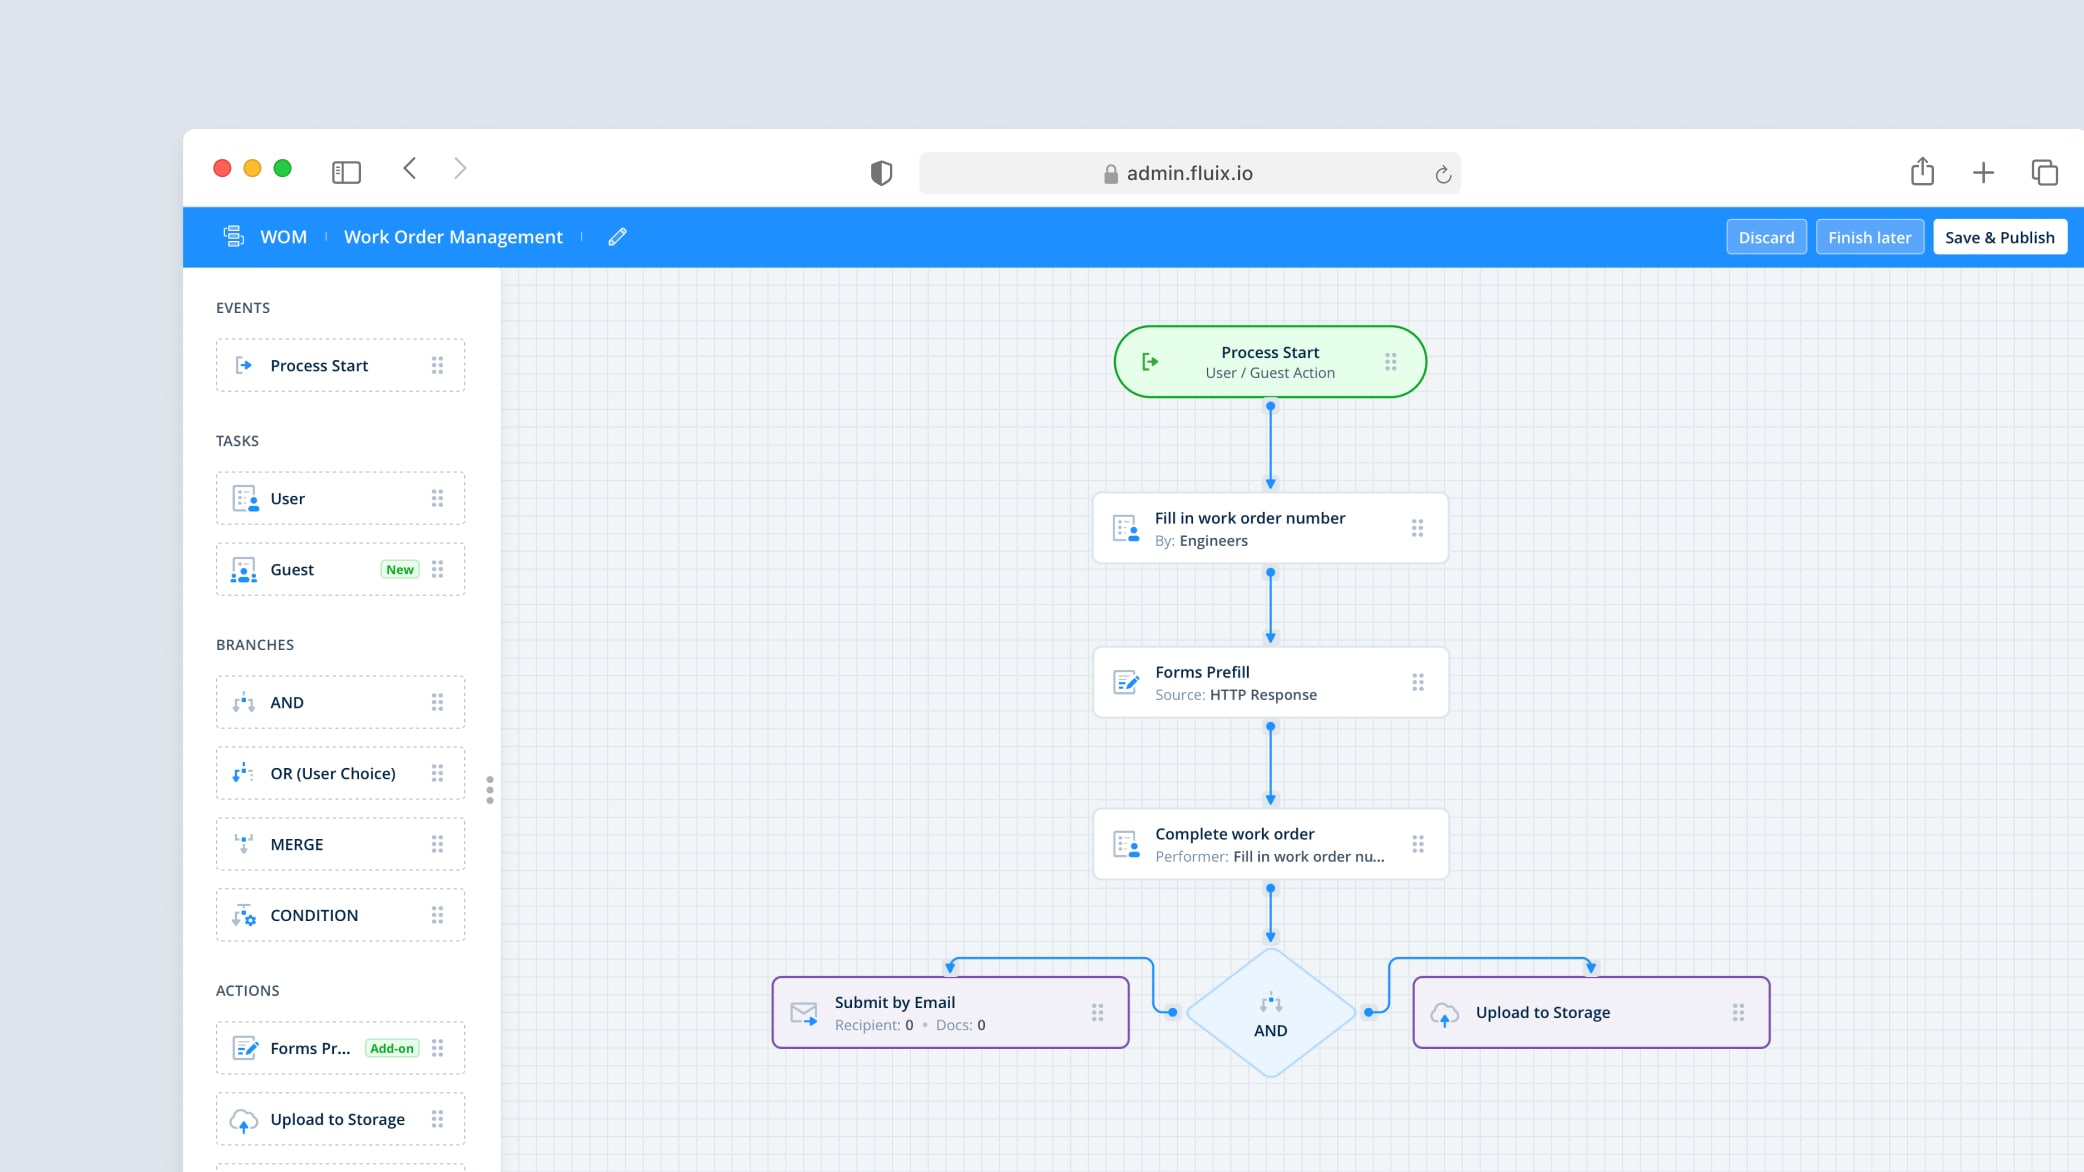 An example of a work order management workflow mapped within the automation software